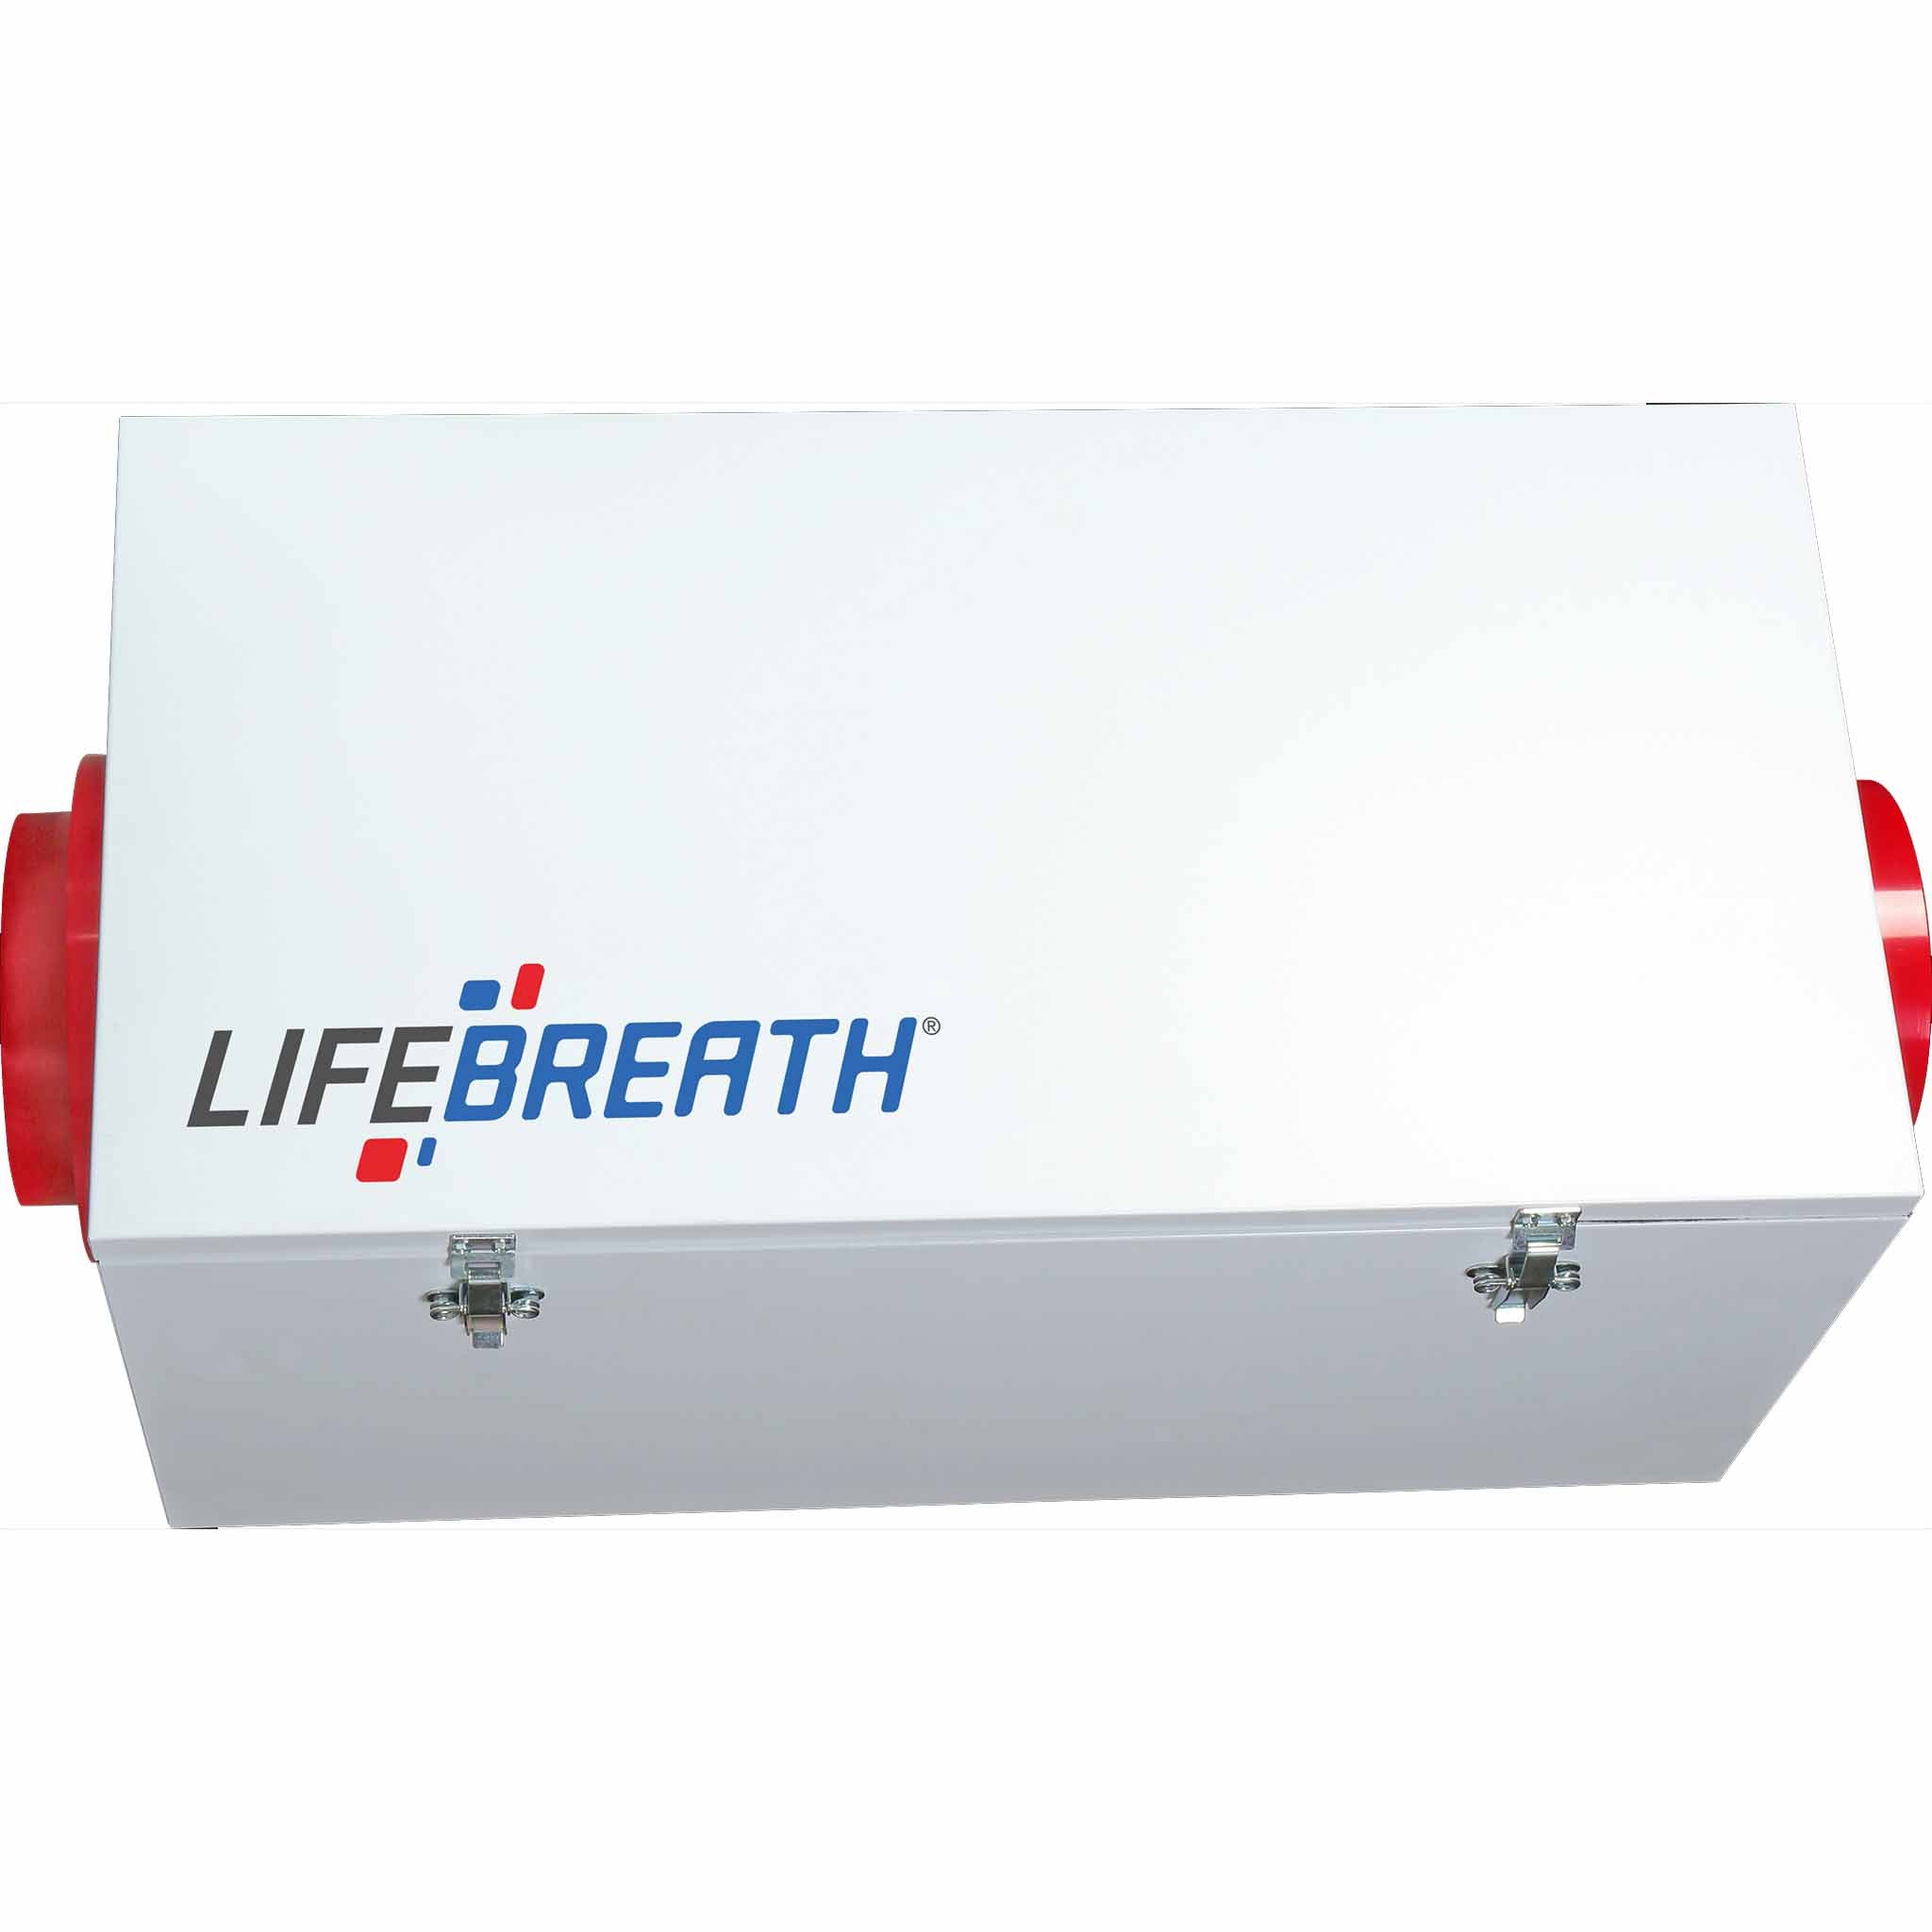 Lifebreath air cleaners remove close to 100% of coarser particles such as pollen, fungus spores, dust, animal dander, and dirt